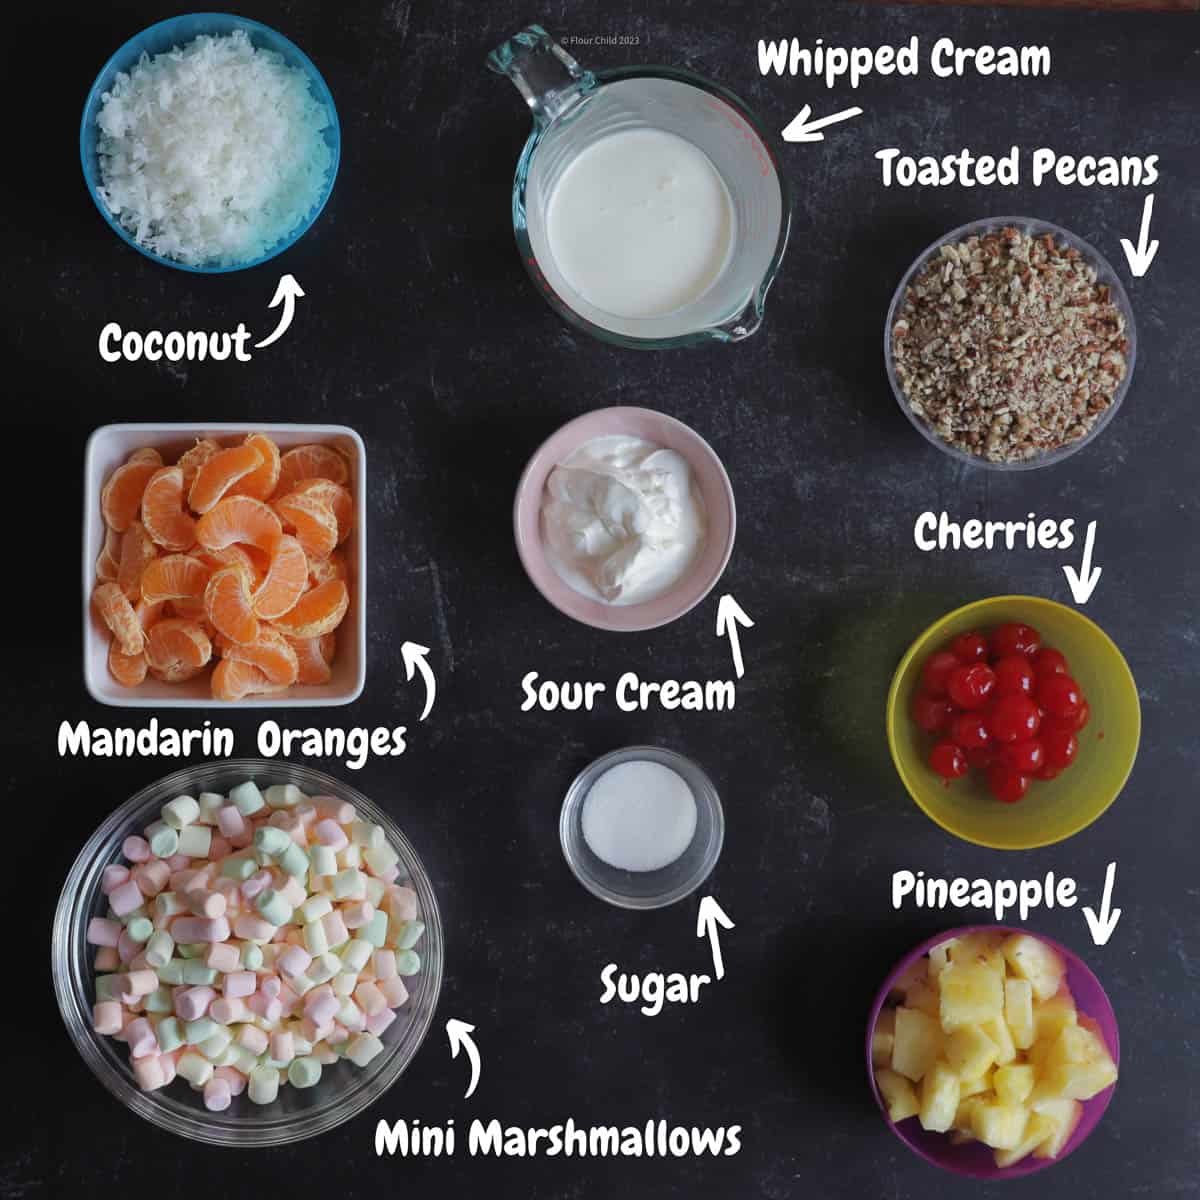 All ingredients for ambrosia salad laid out on a board.